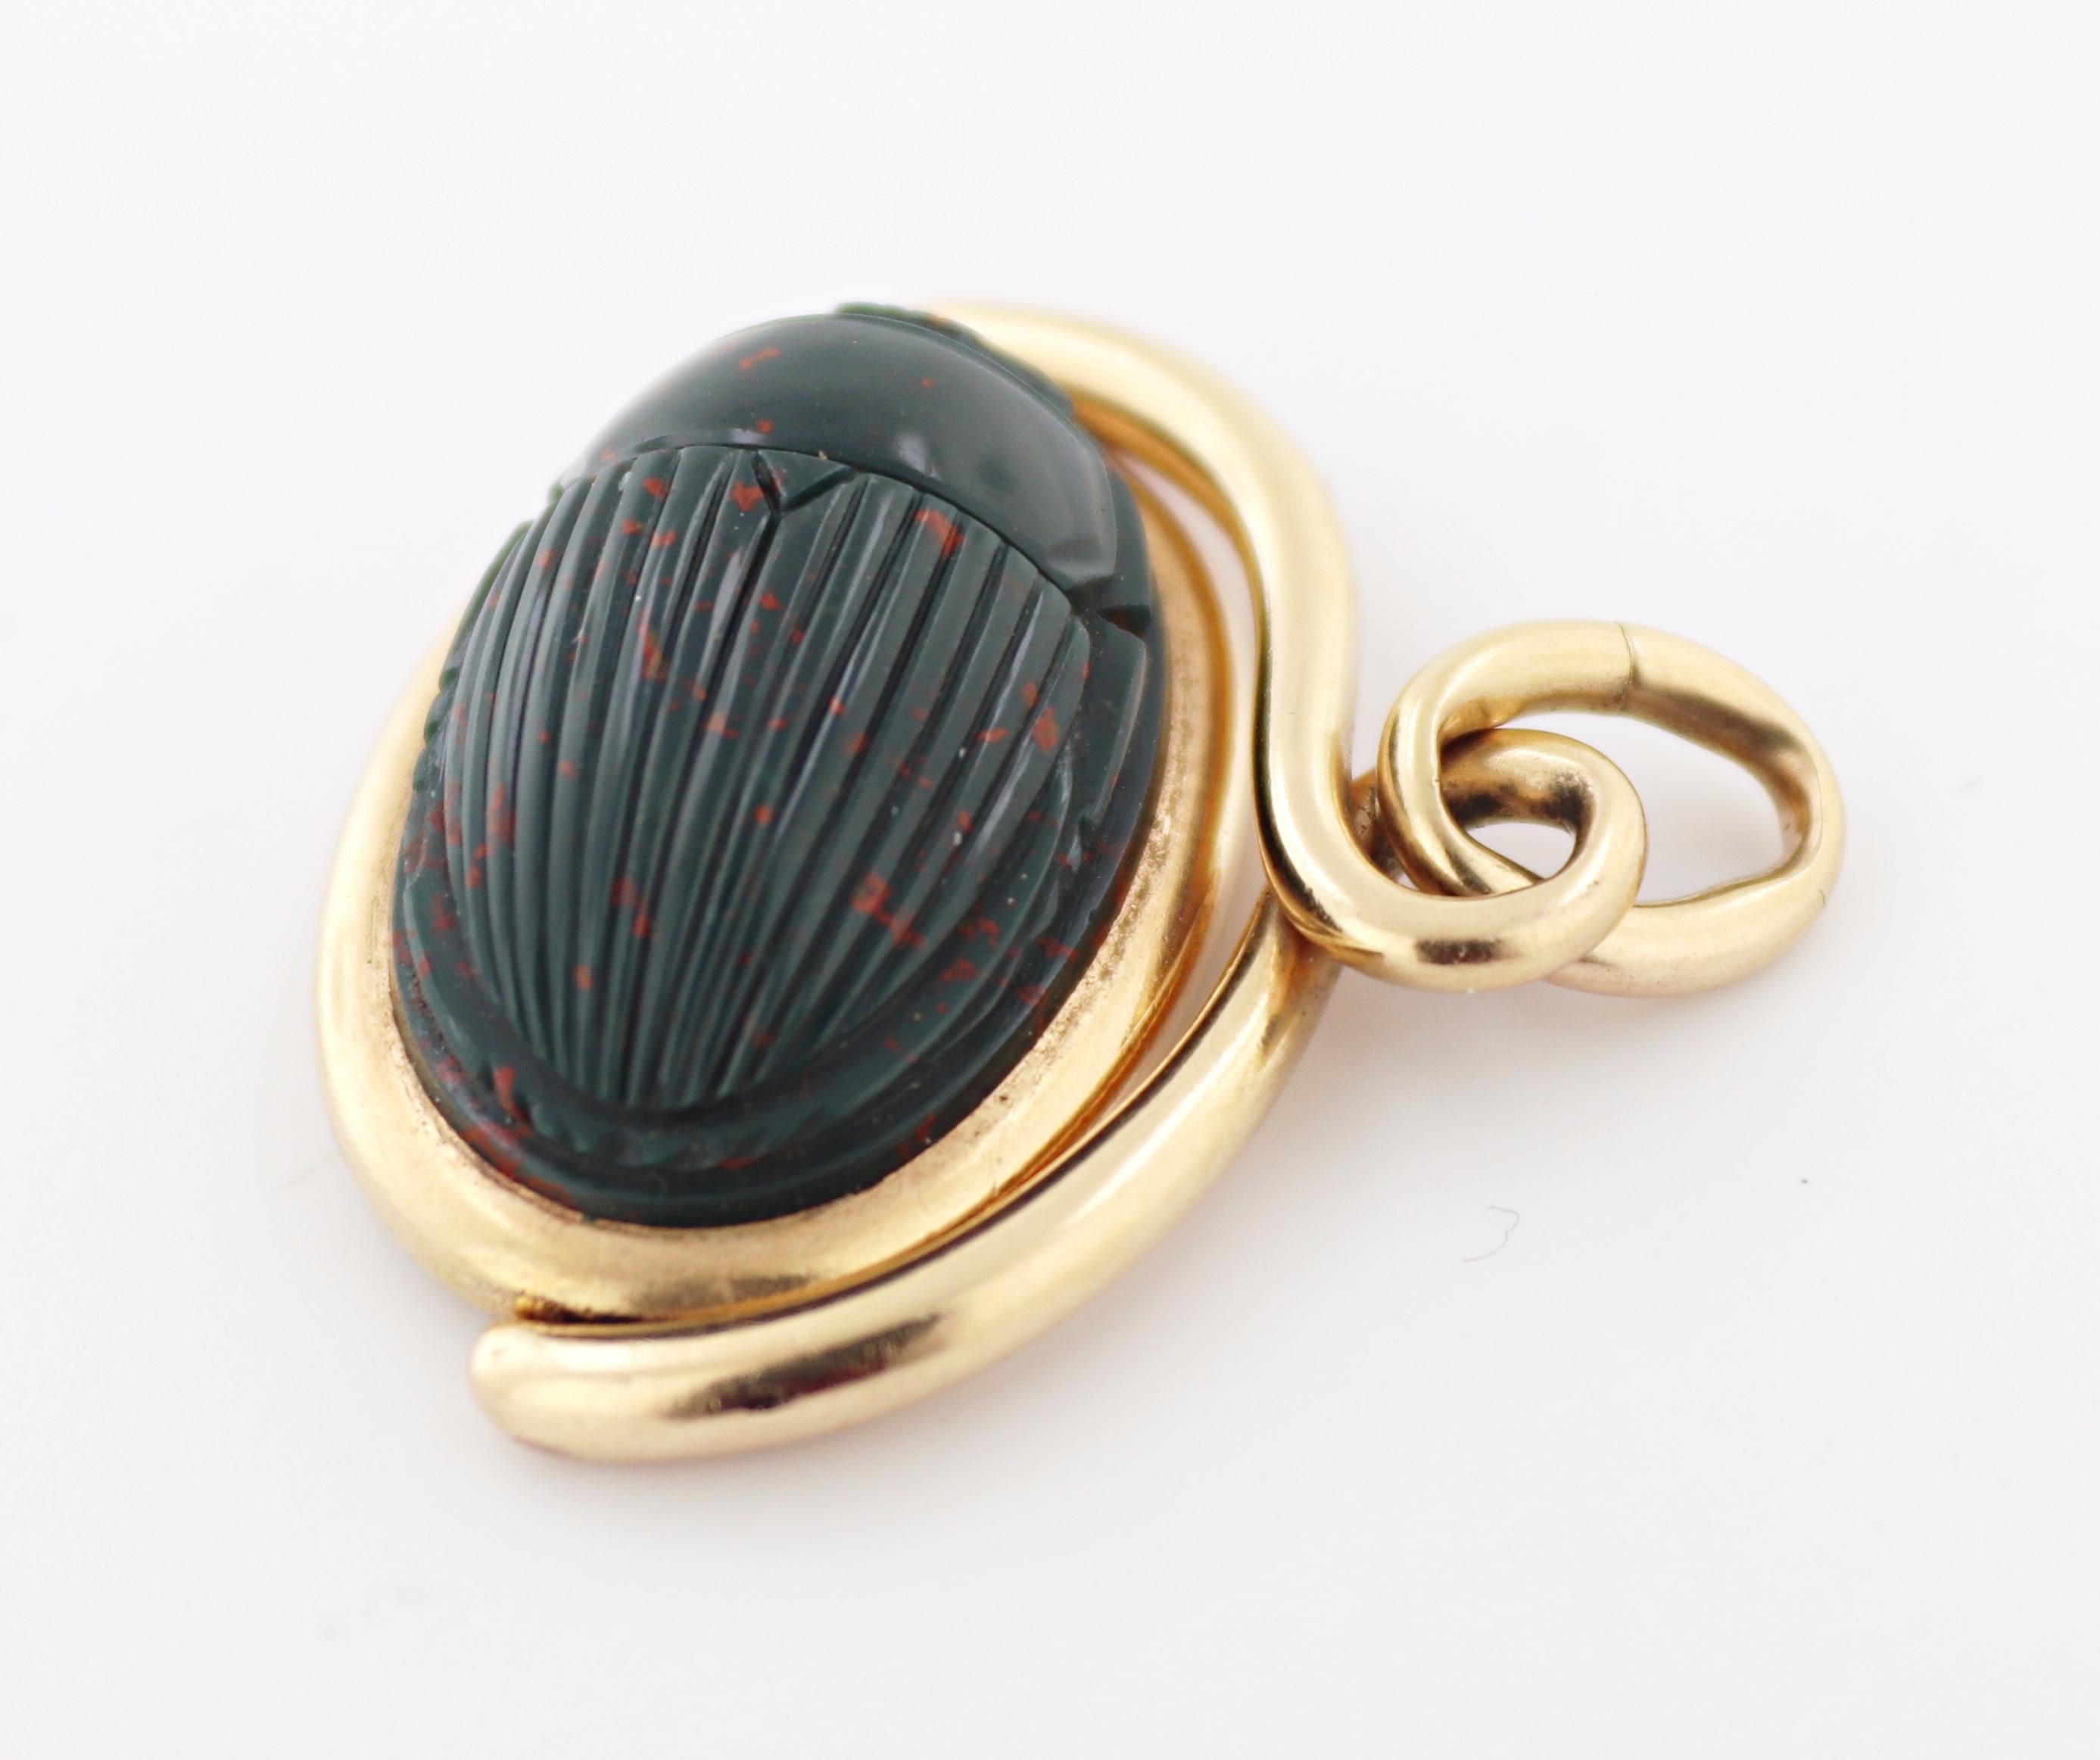 The carved bloodstone depicts a scarab, the bottom features an intaglio
seal of a horse, 19.5 X 12.5 X 8.1 mm, set in 14k rose gold swivel fob
mounting, Gross Weight: 6.86 grams.